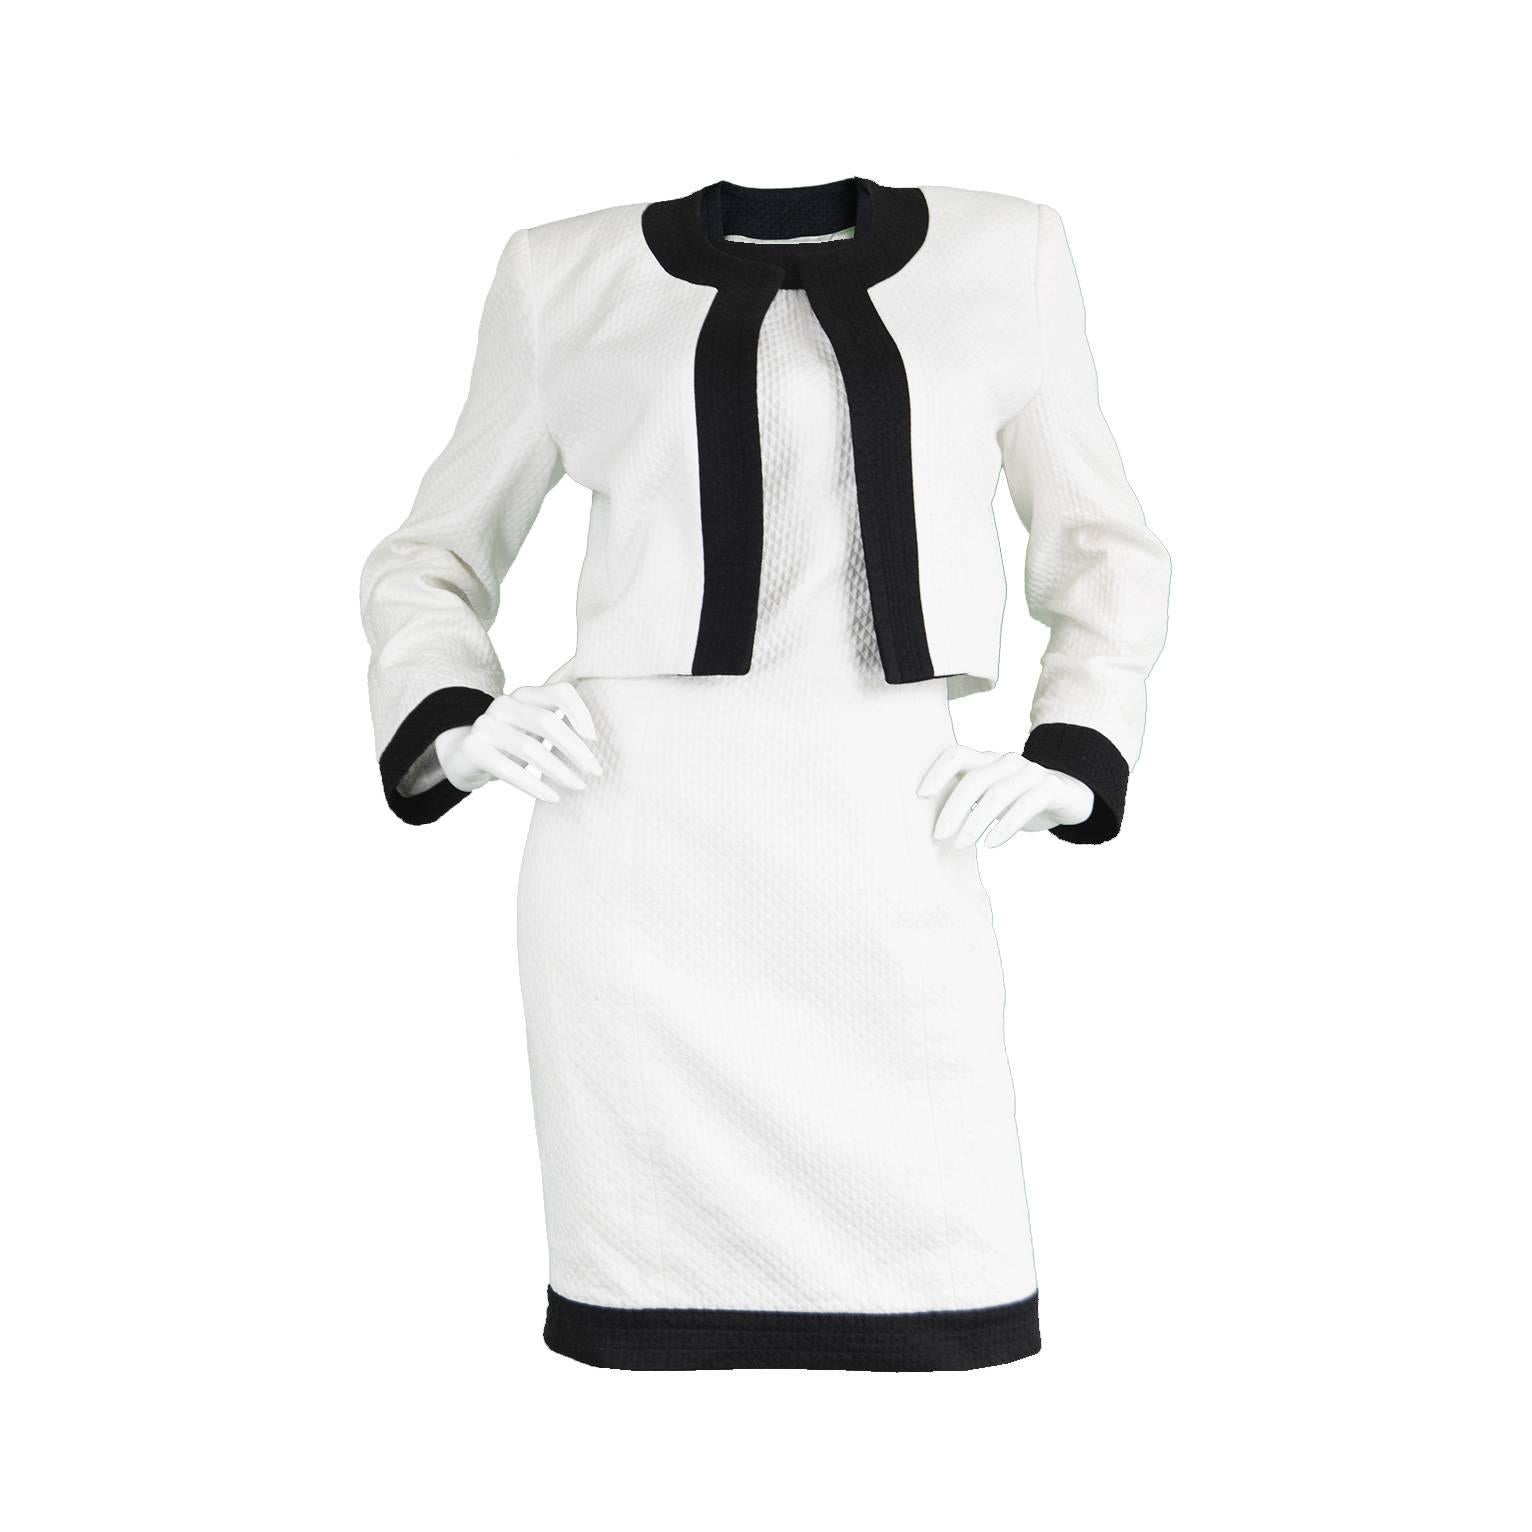 Givenchy White and Black Futuristic Quilted Dress and Jacket Set, 1980s For Sale